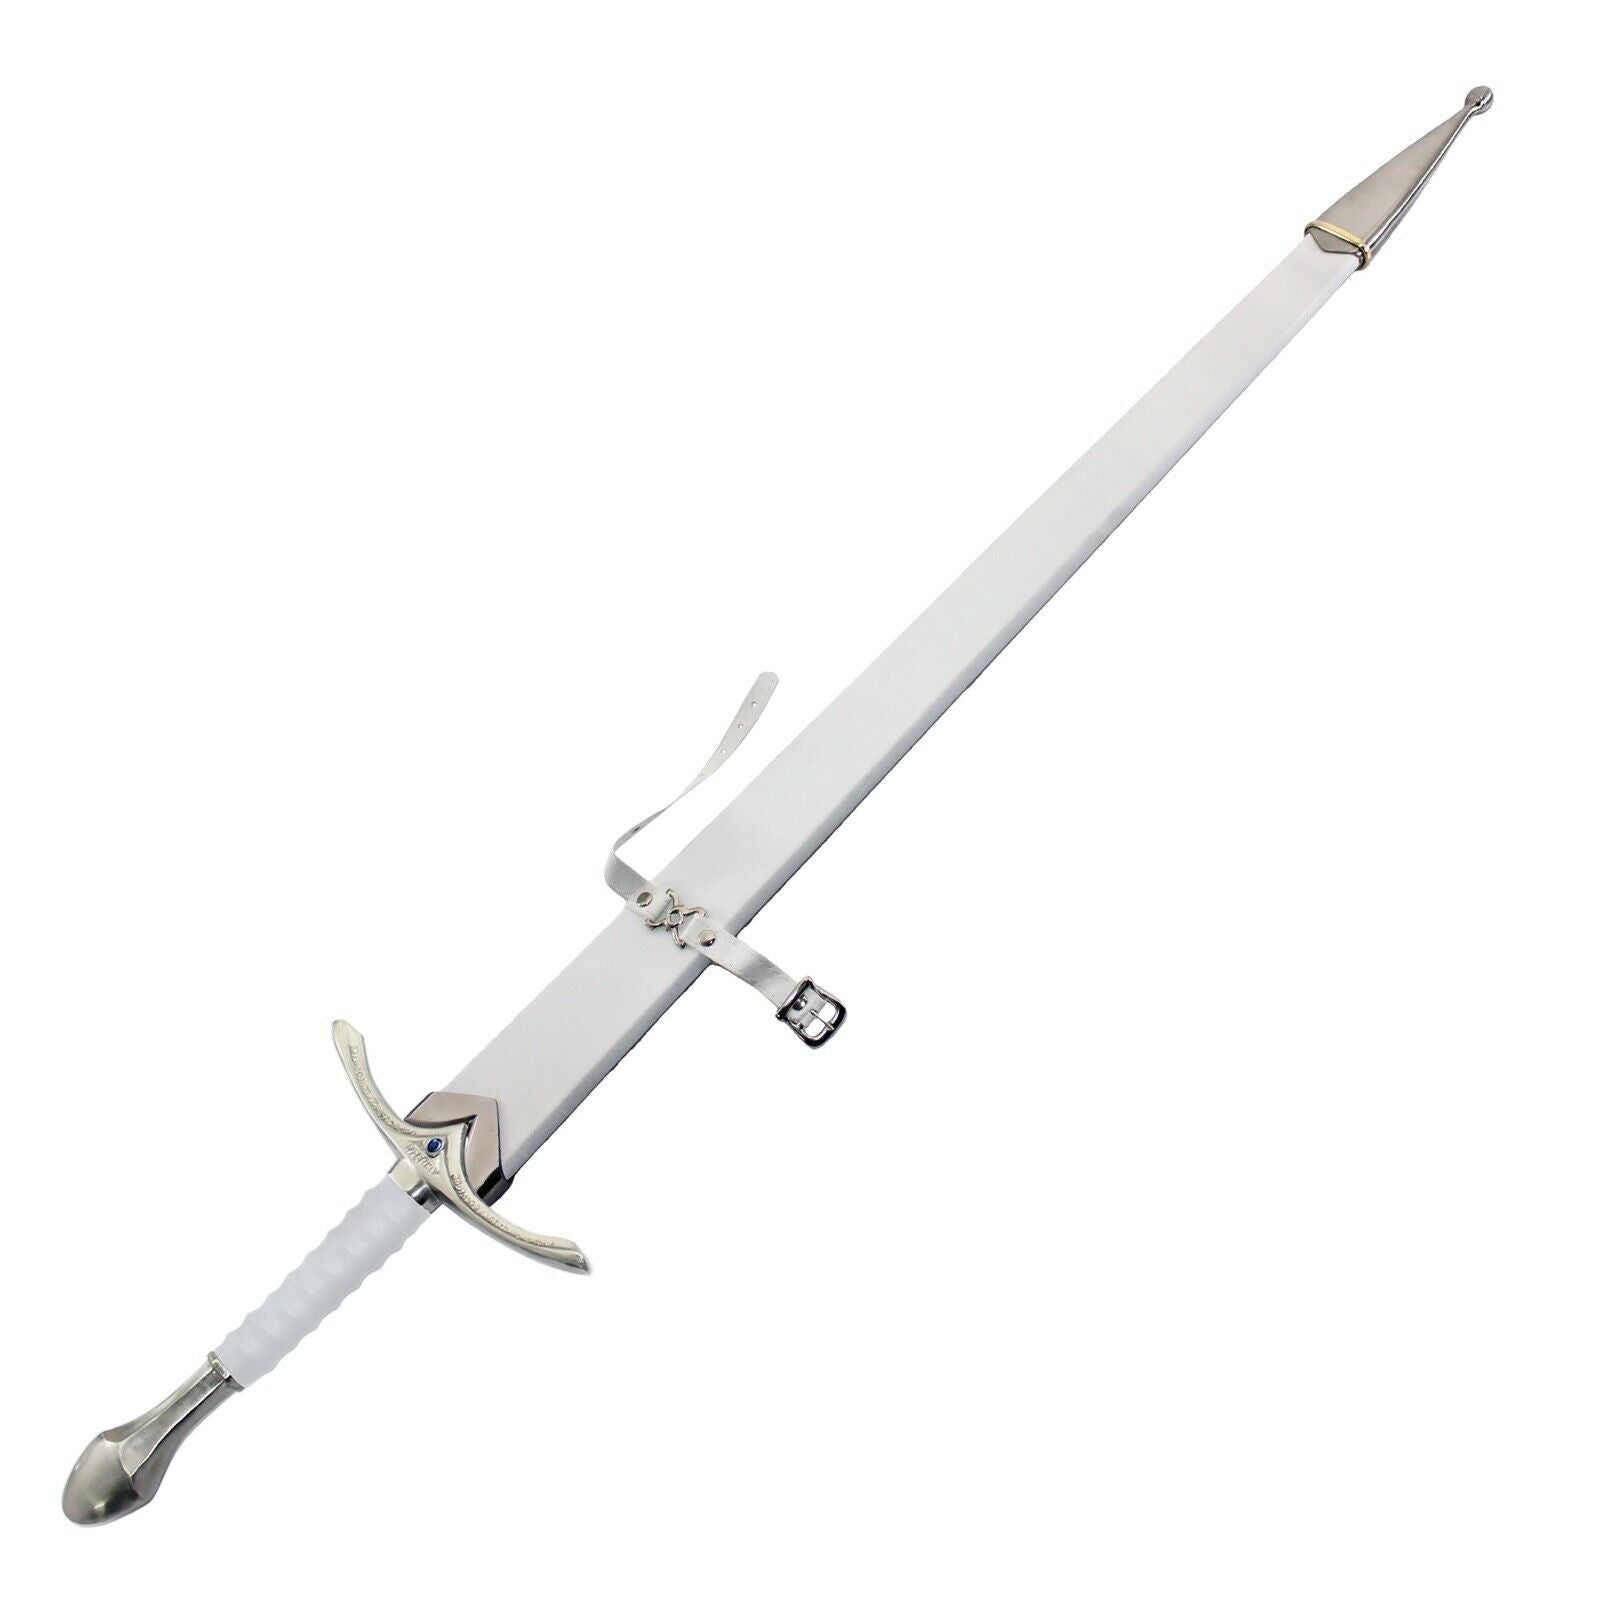 Lotr White Sword of Turgon The foe hammer Glamdring replica with scabbard